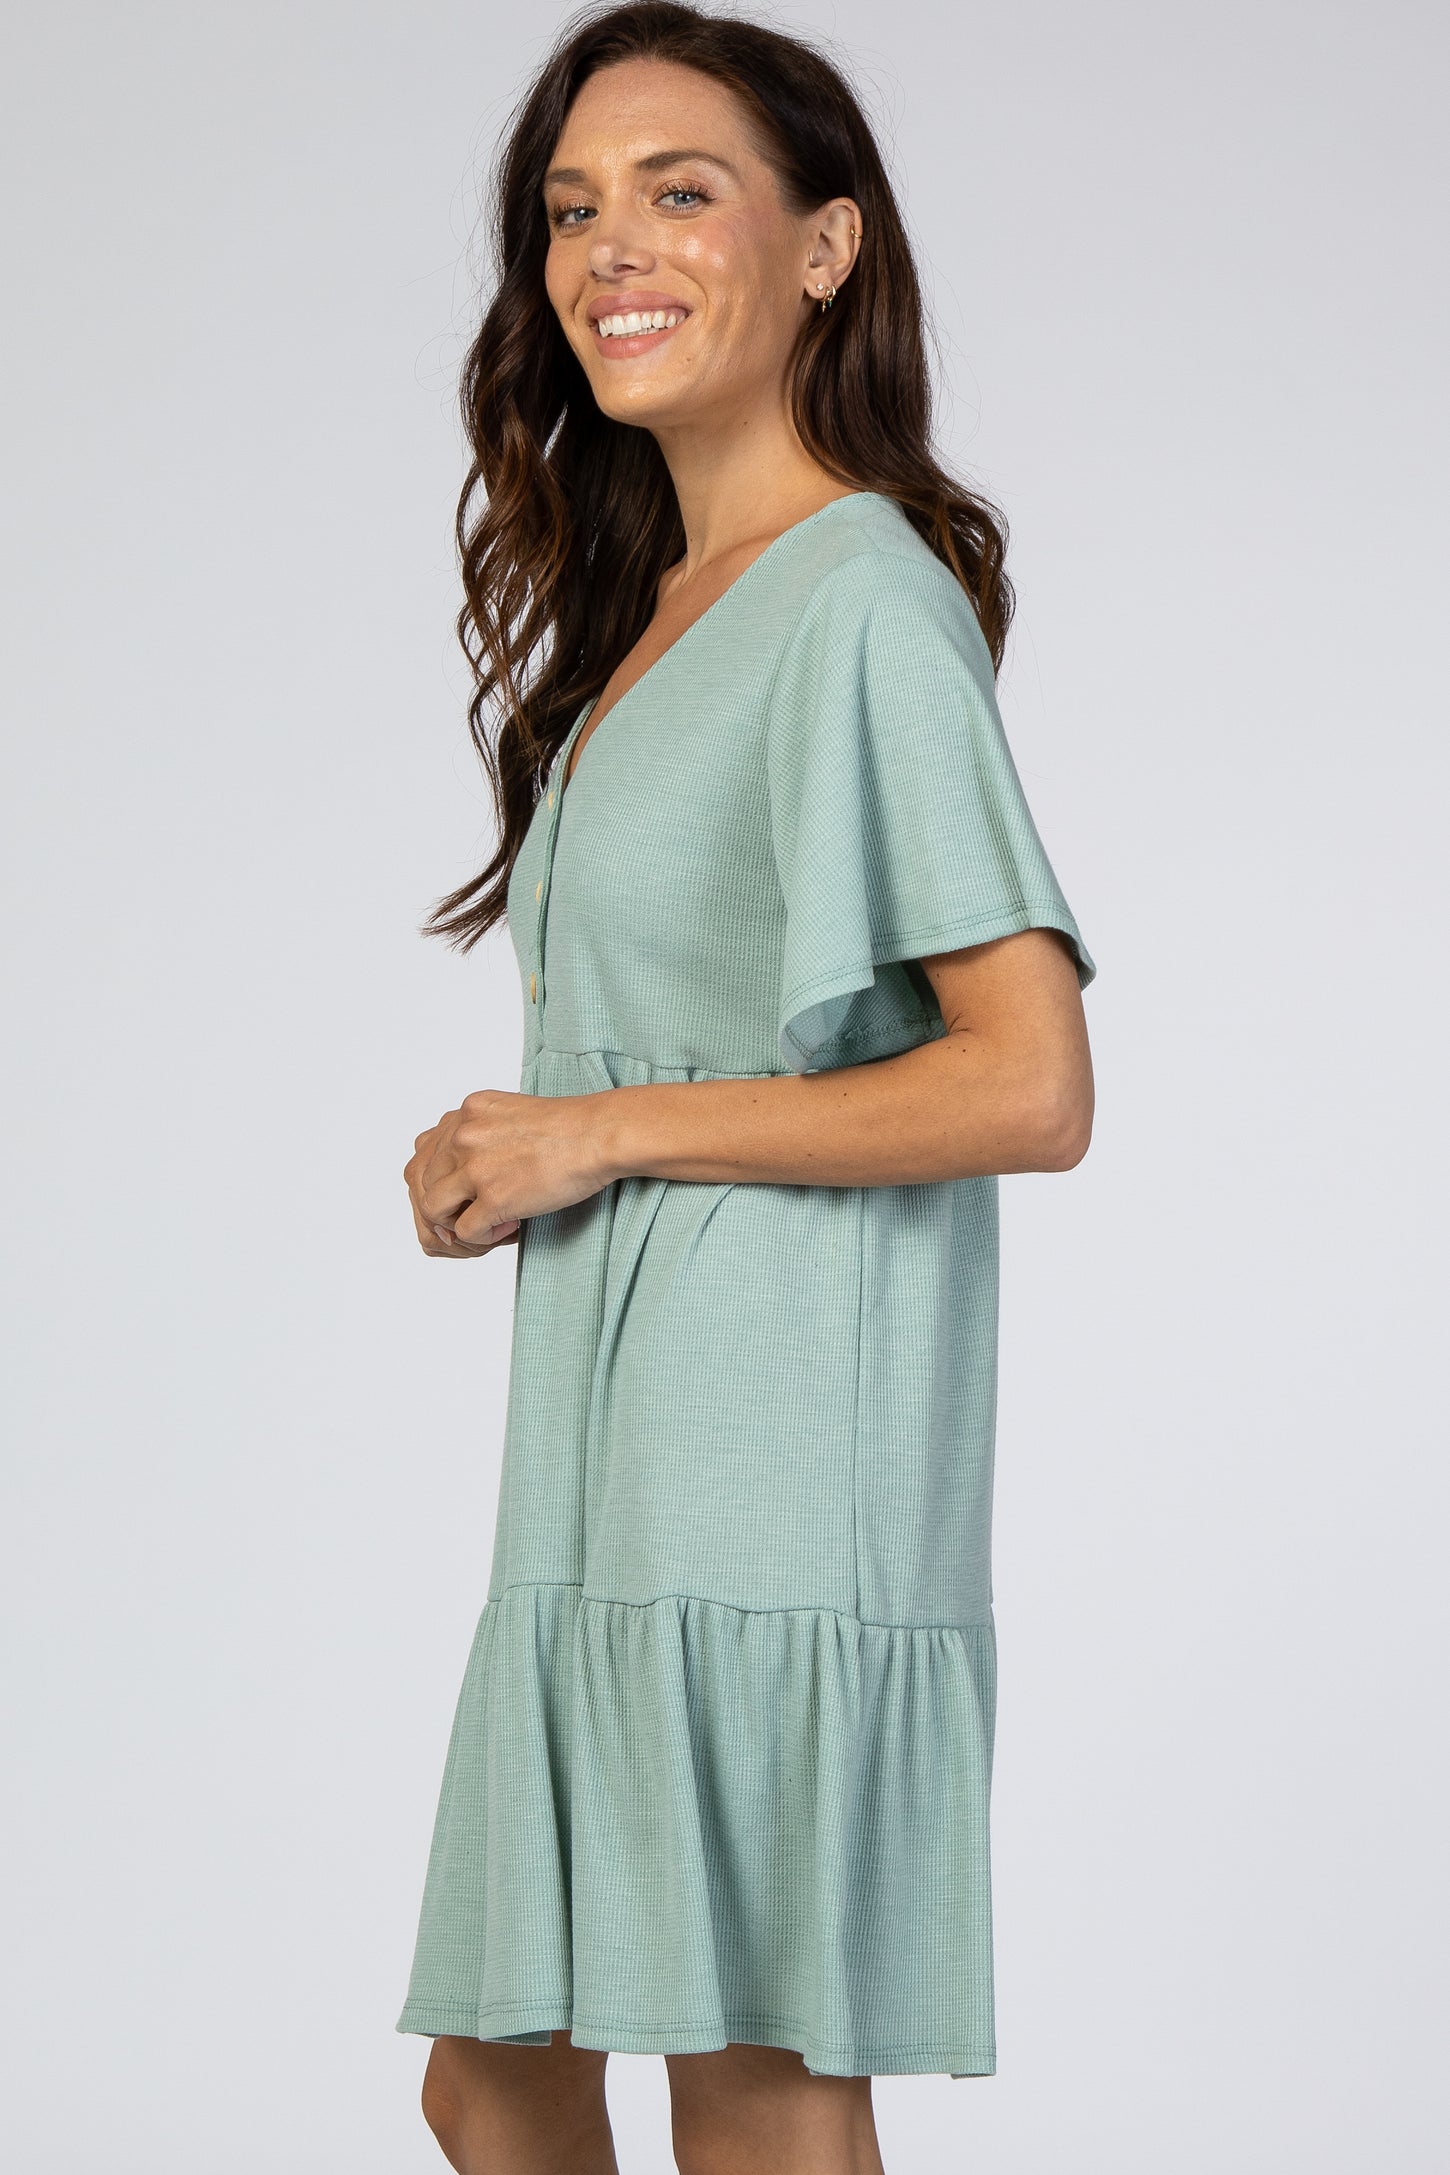 Mint Green Button Front Tiered Dress